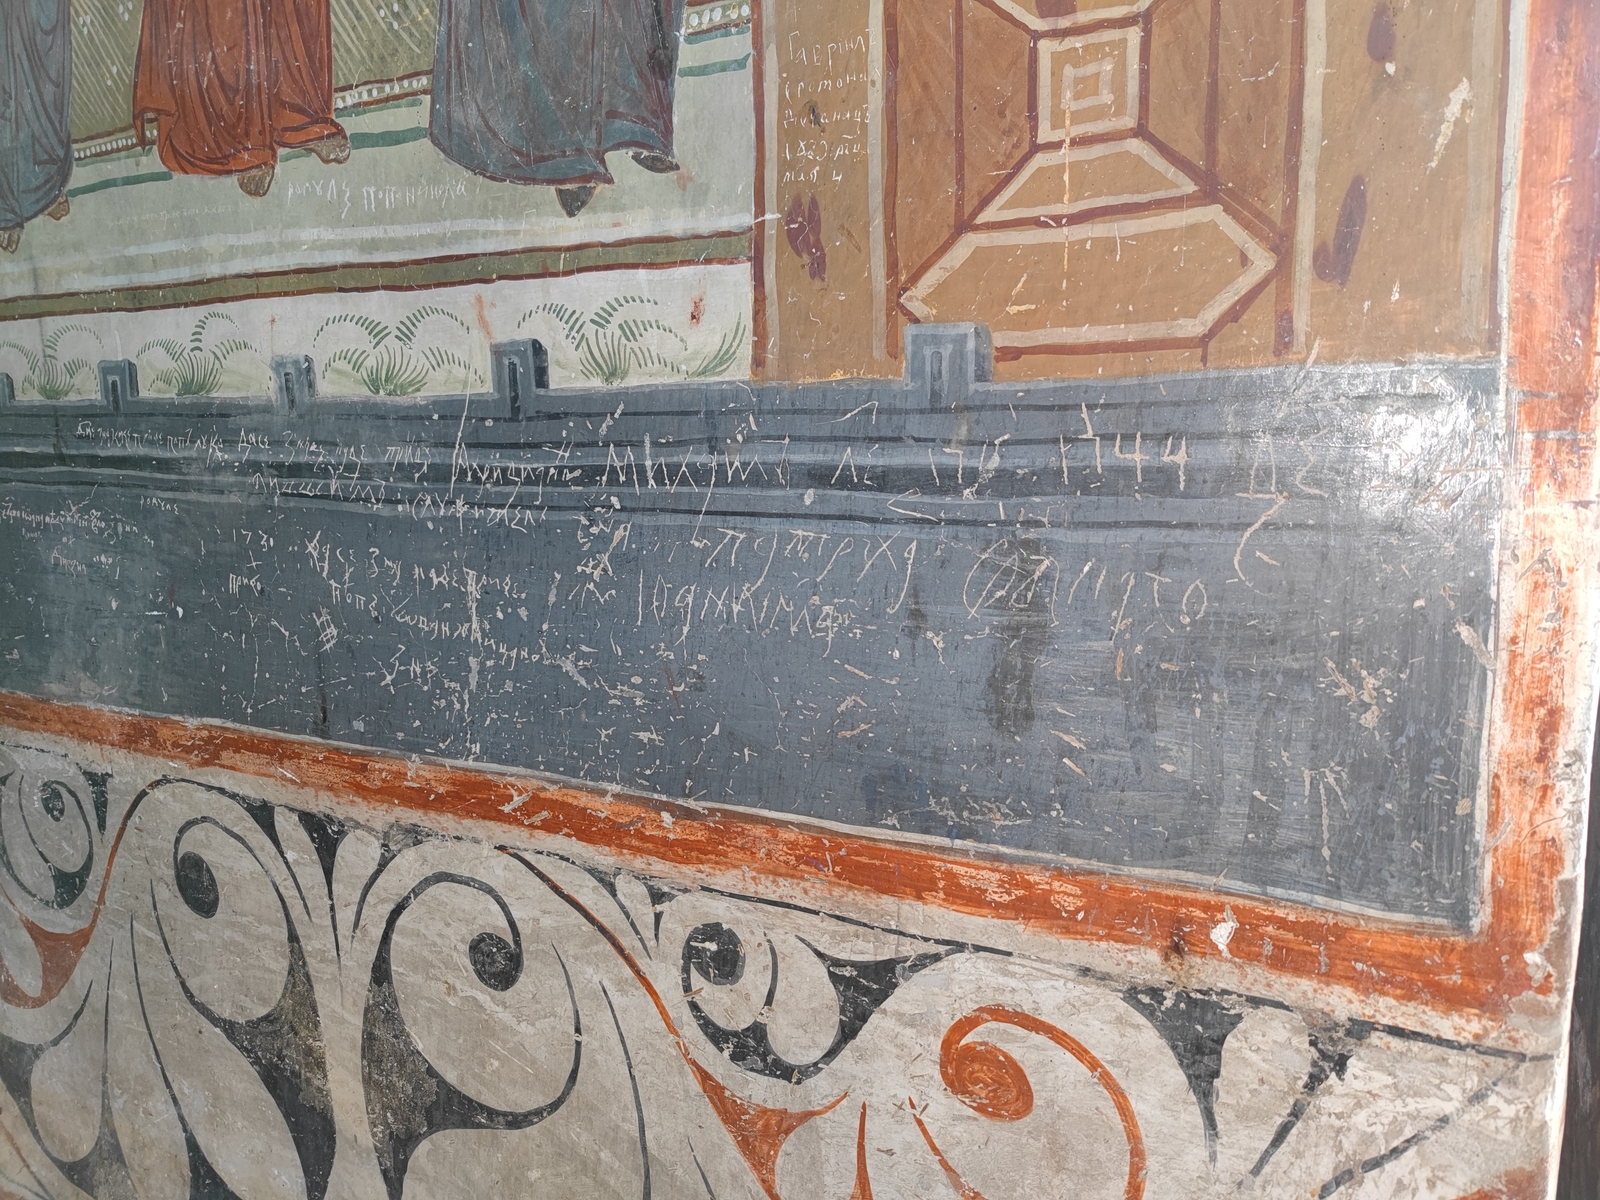 Later Date Incised Inscription